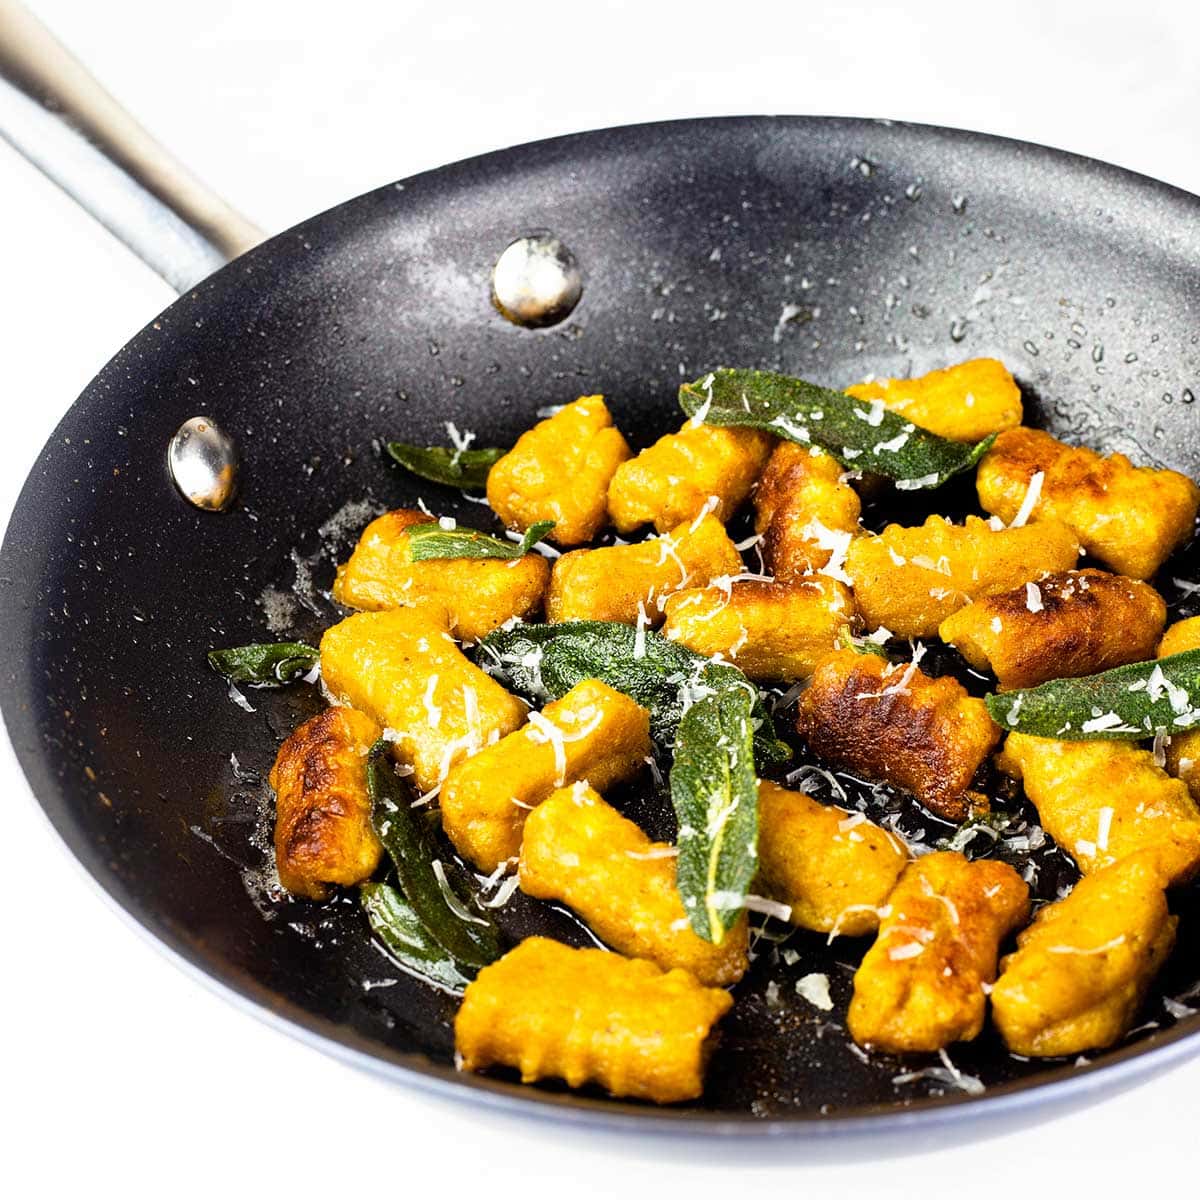 butternut squash gnocchi in a pan with brown butter and fried sage.